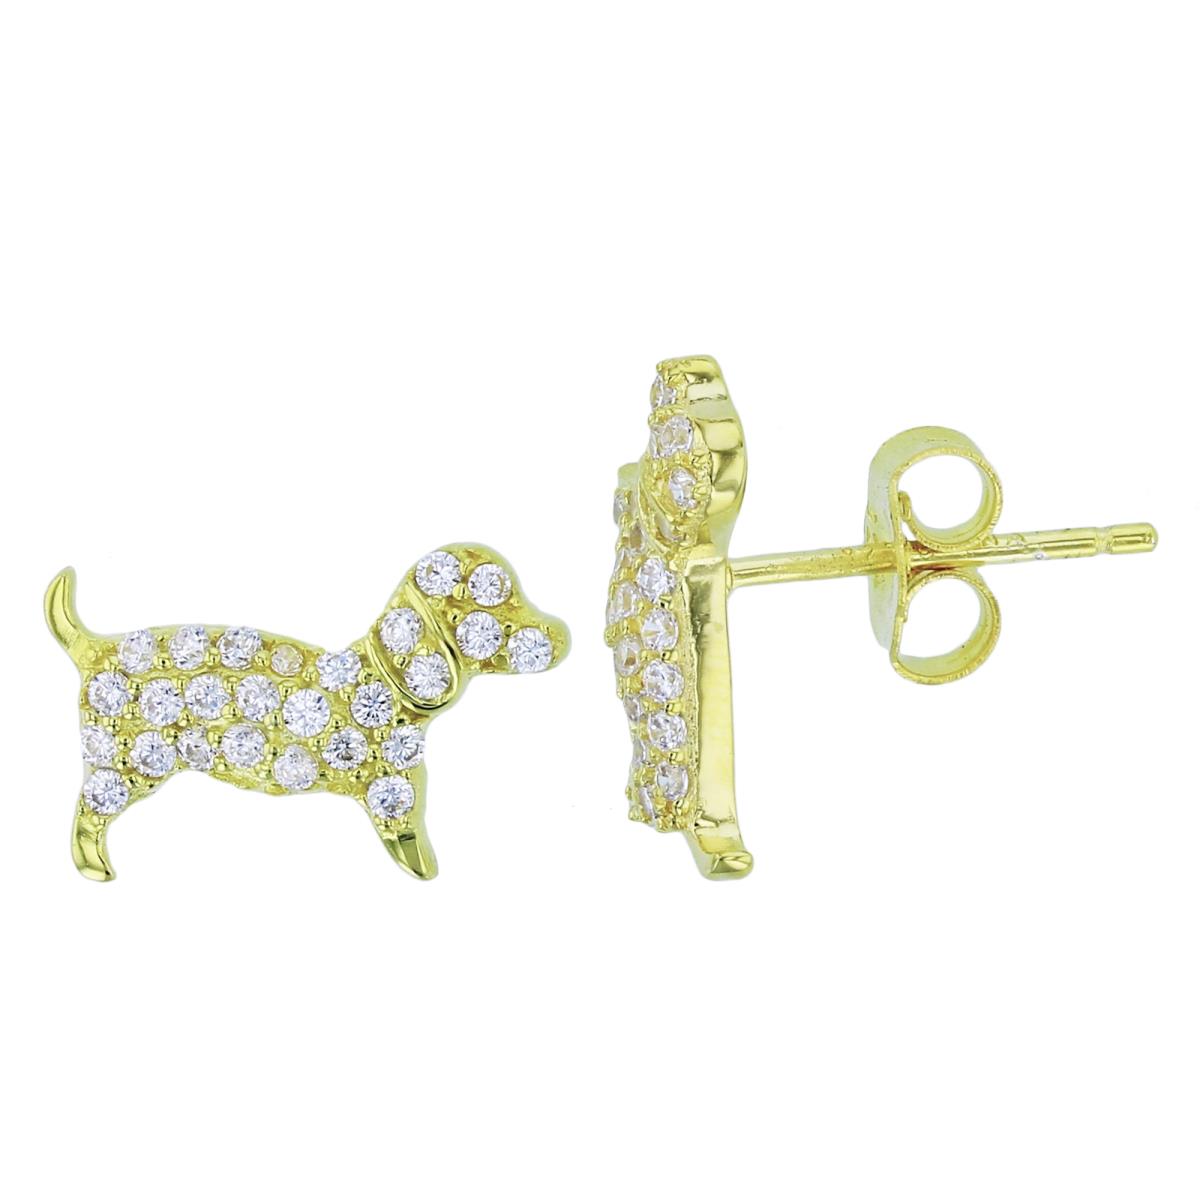 Sterling Silver+1Micron Yellow Gold Rnd CZ Pave Puffy Dog Studs